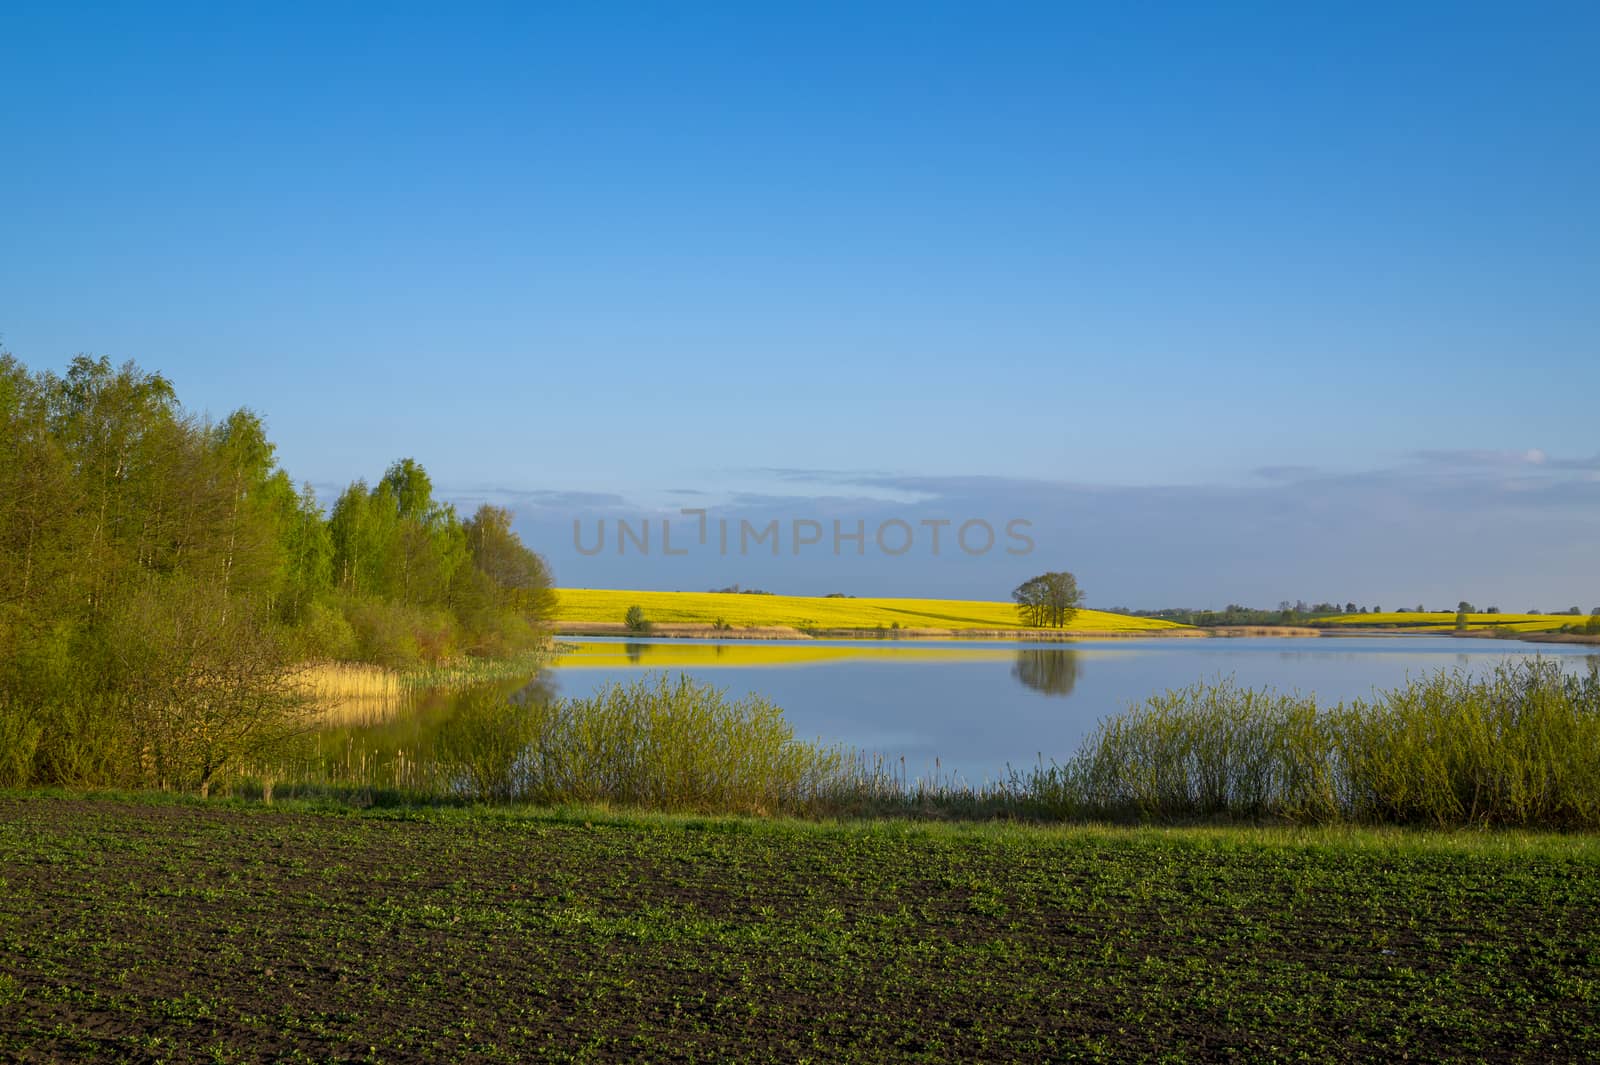 Spring agricultural landscape with colorful yellow rapeseed crop and lake with newly ploughed farm field in the foreground under a sunny blue sky